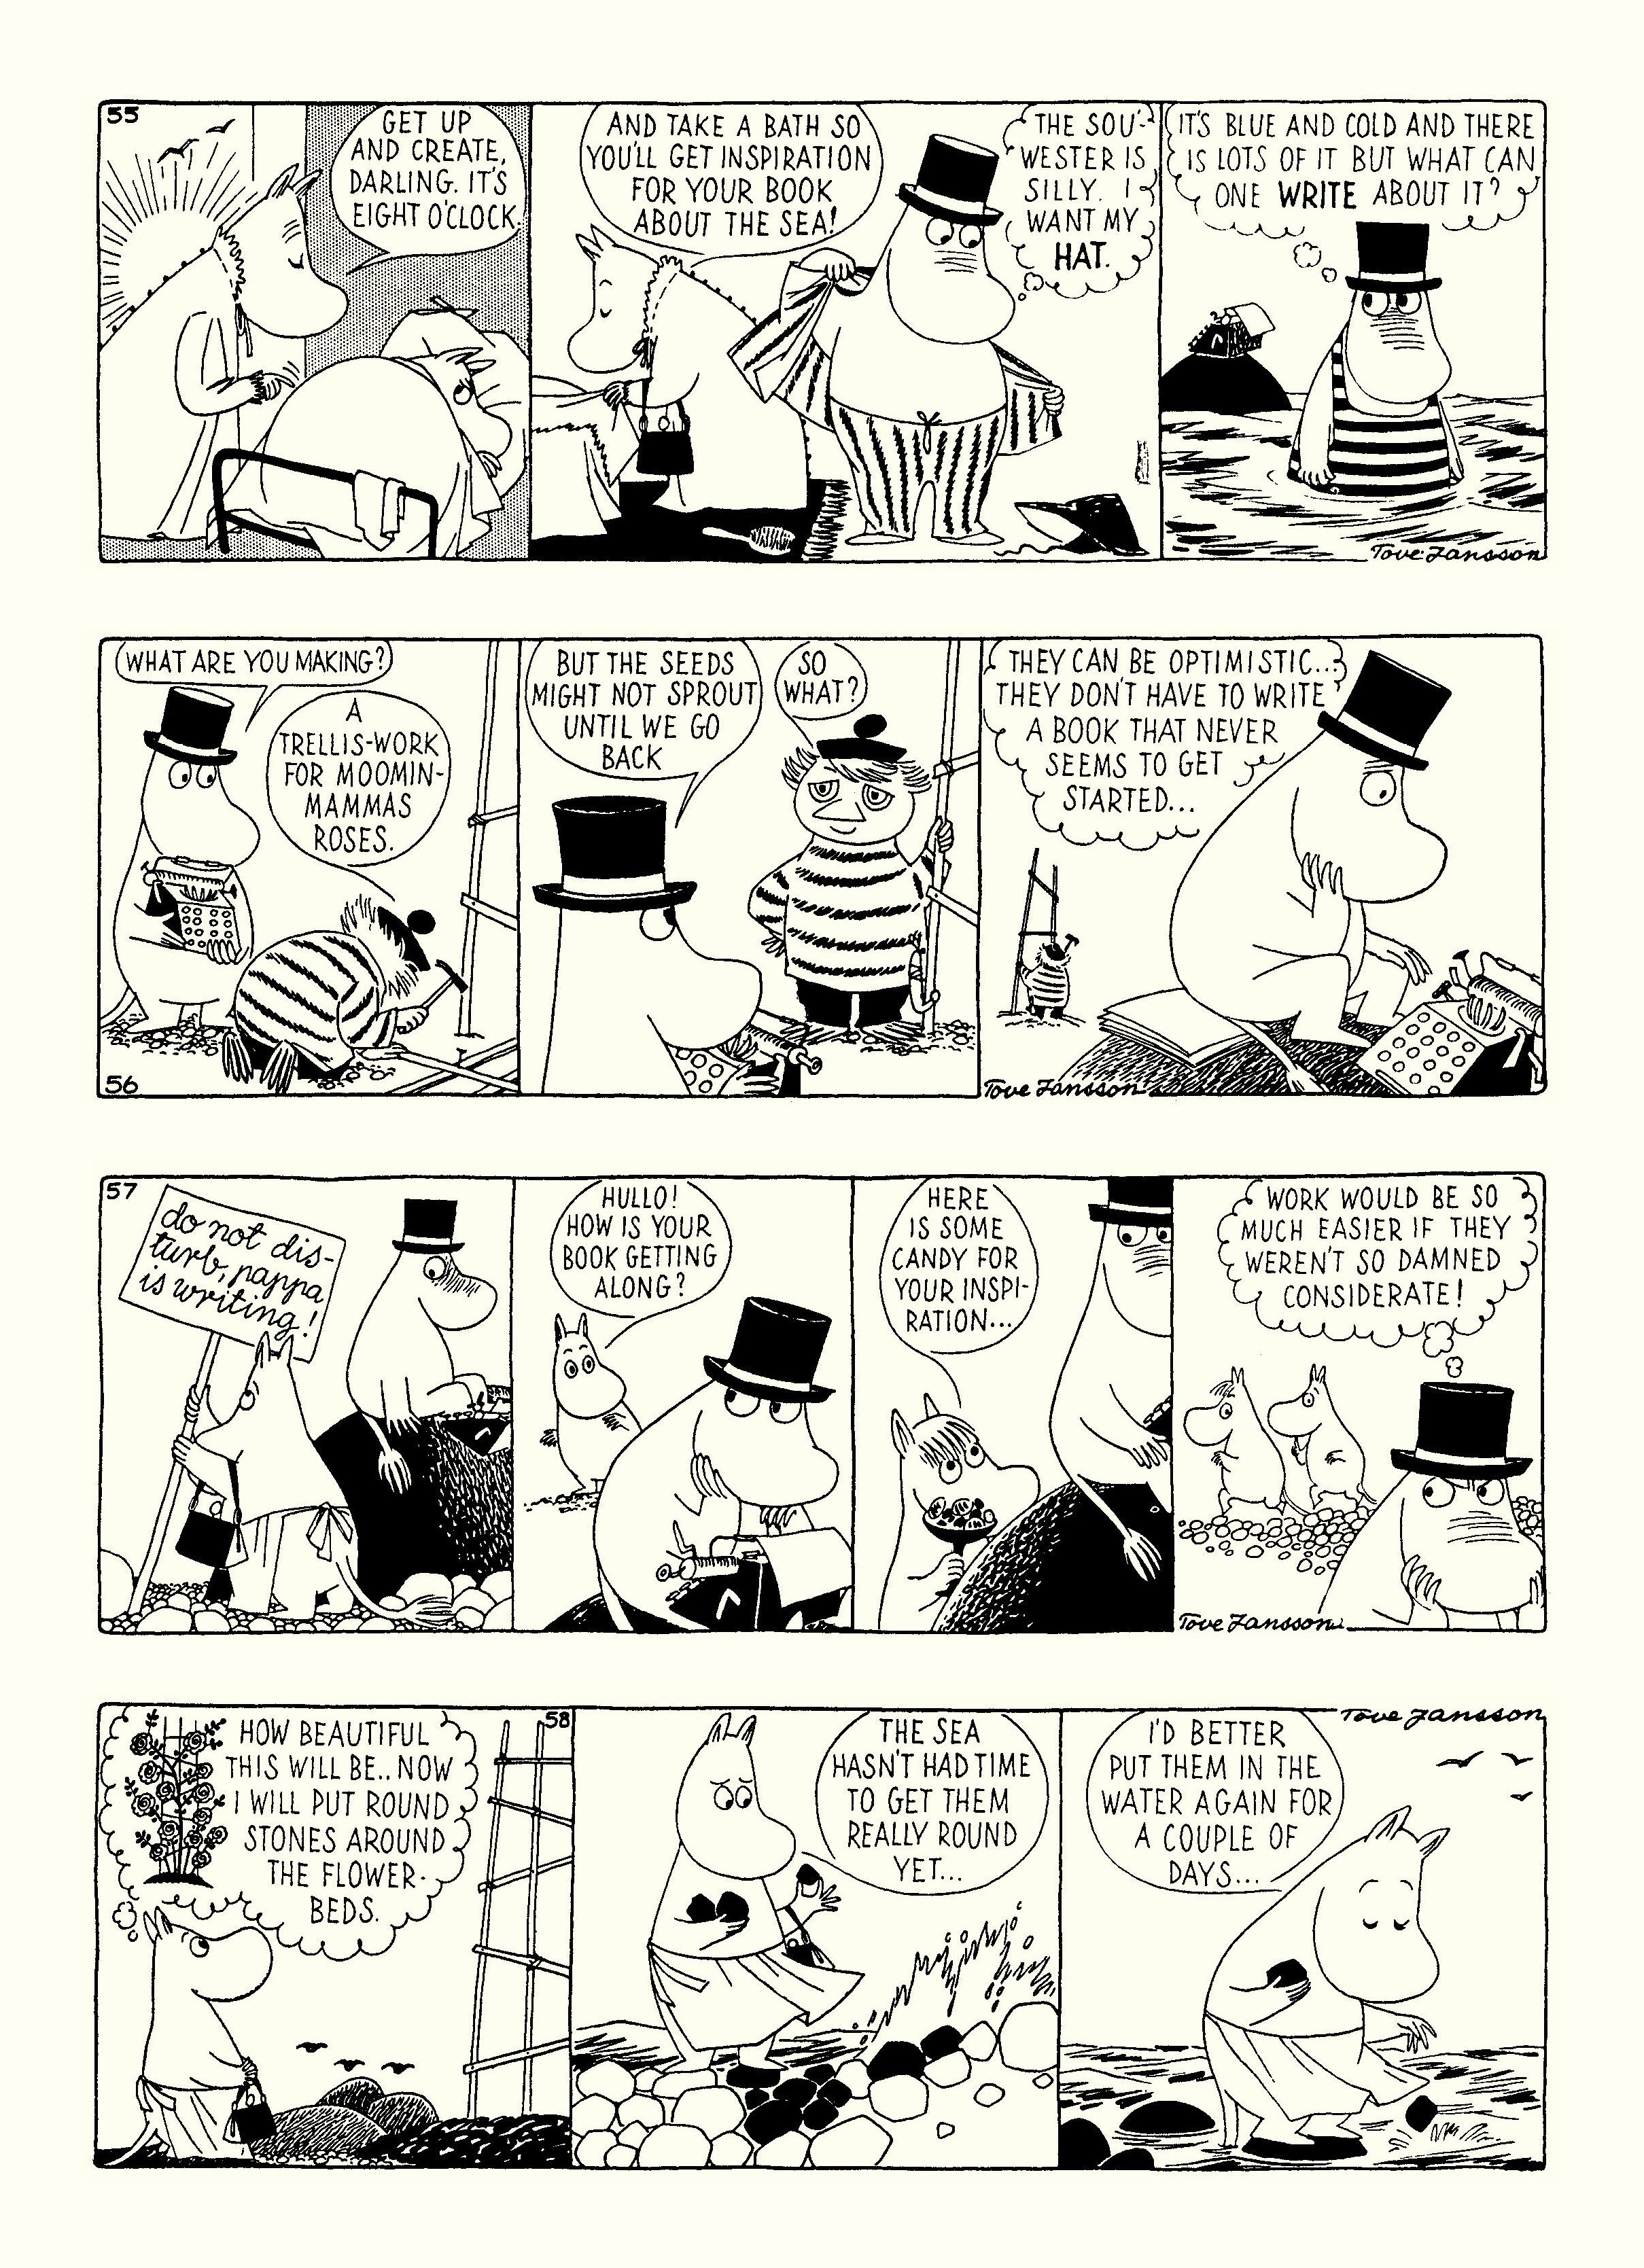 Read online Moomin: The Complete Tove Jansson Comic Strip comic -  Issue # TPB 3 - 69